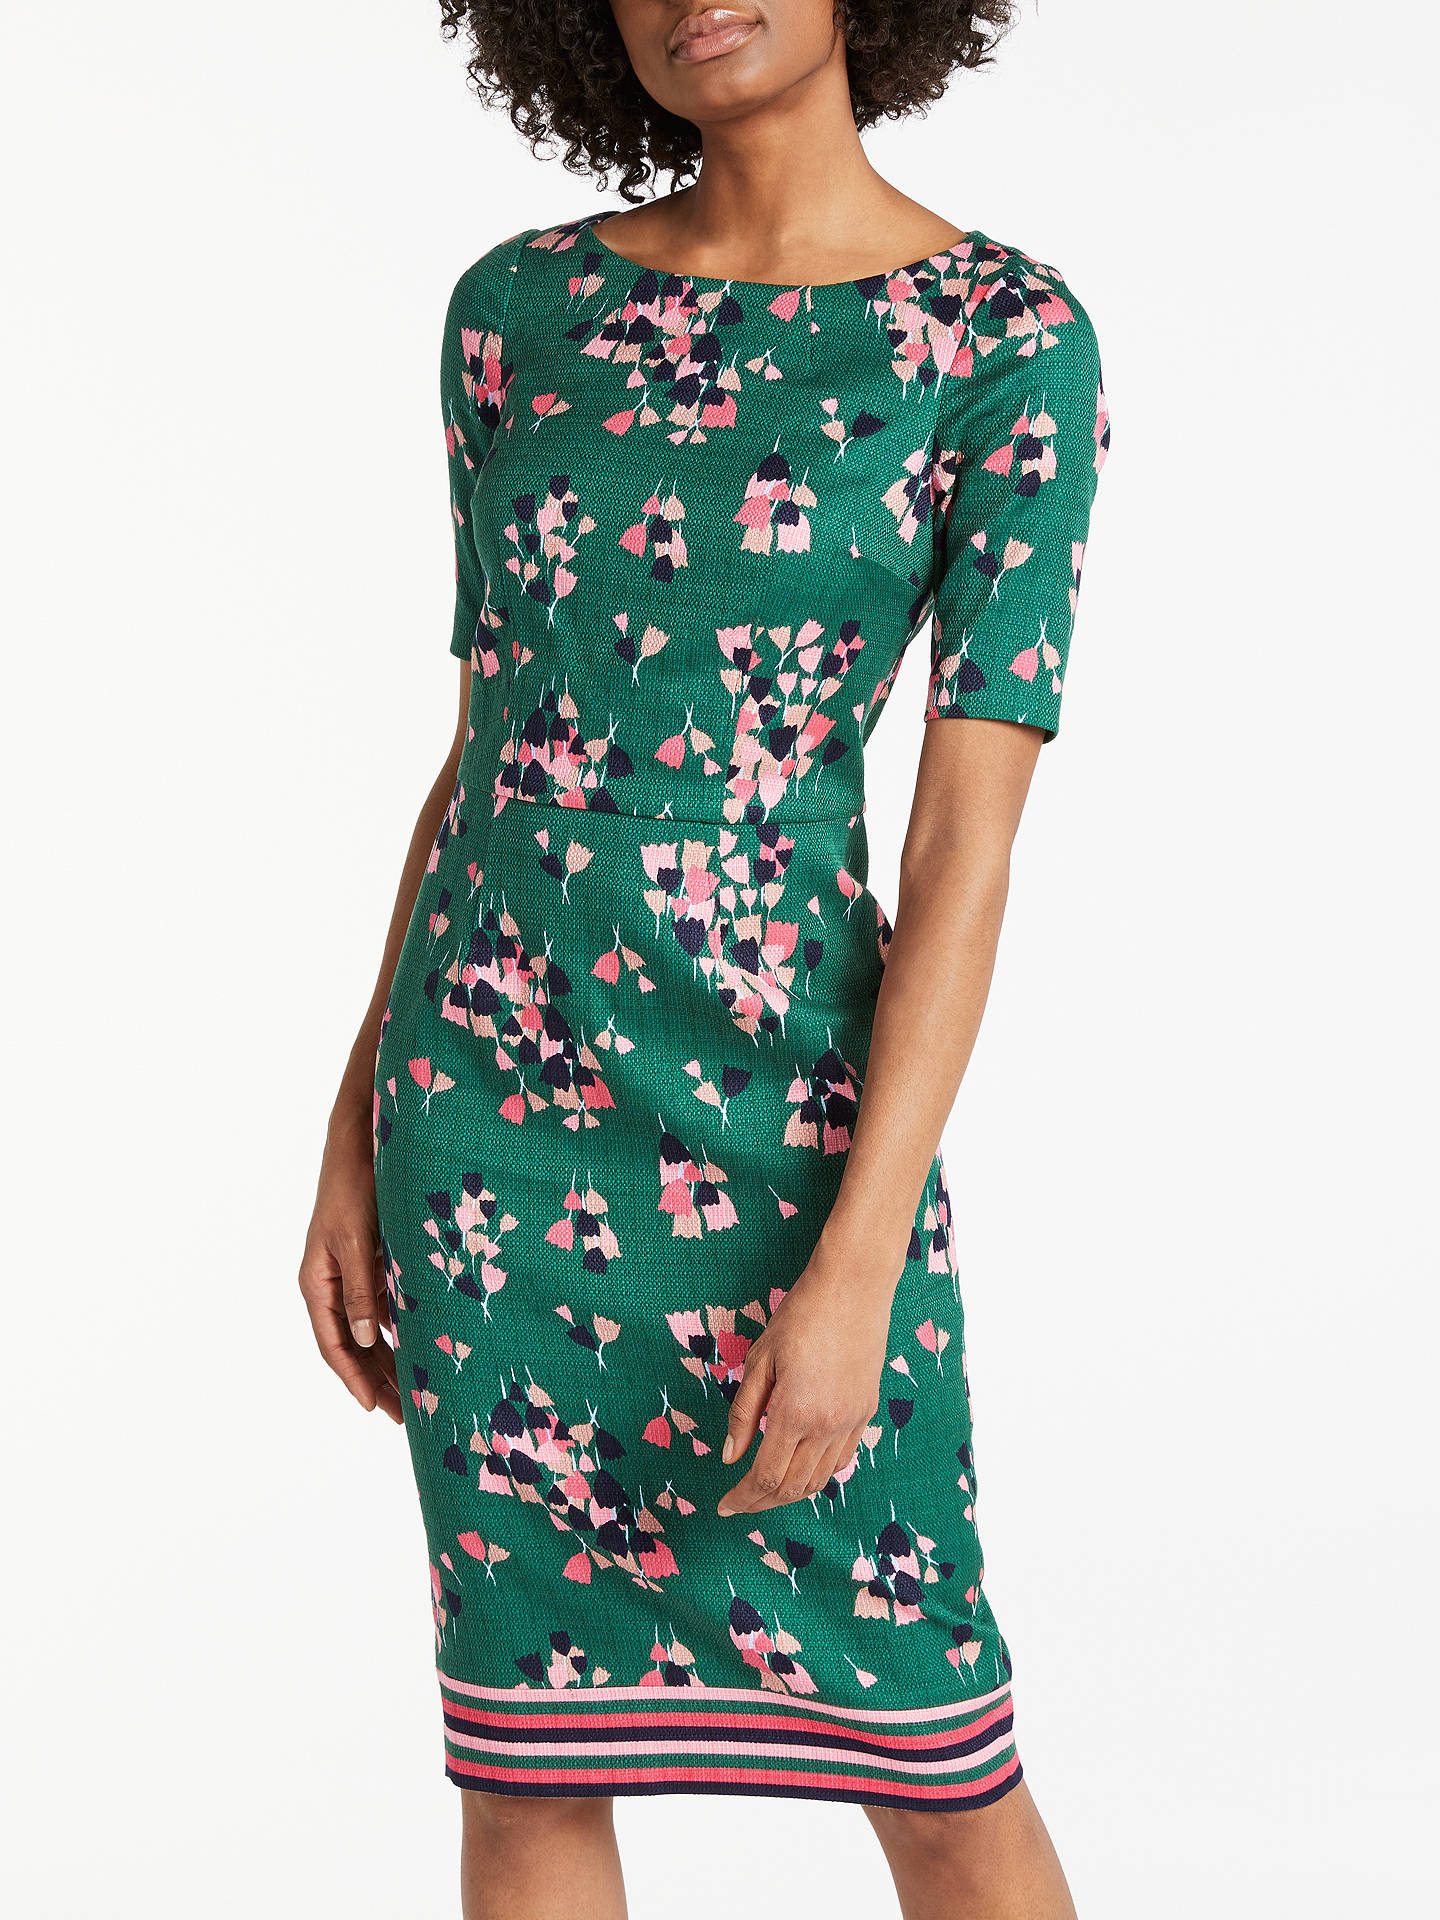 Boden Fleur Fitted Dress at John Lewis & Partners